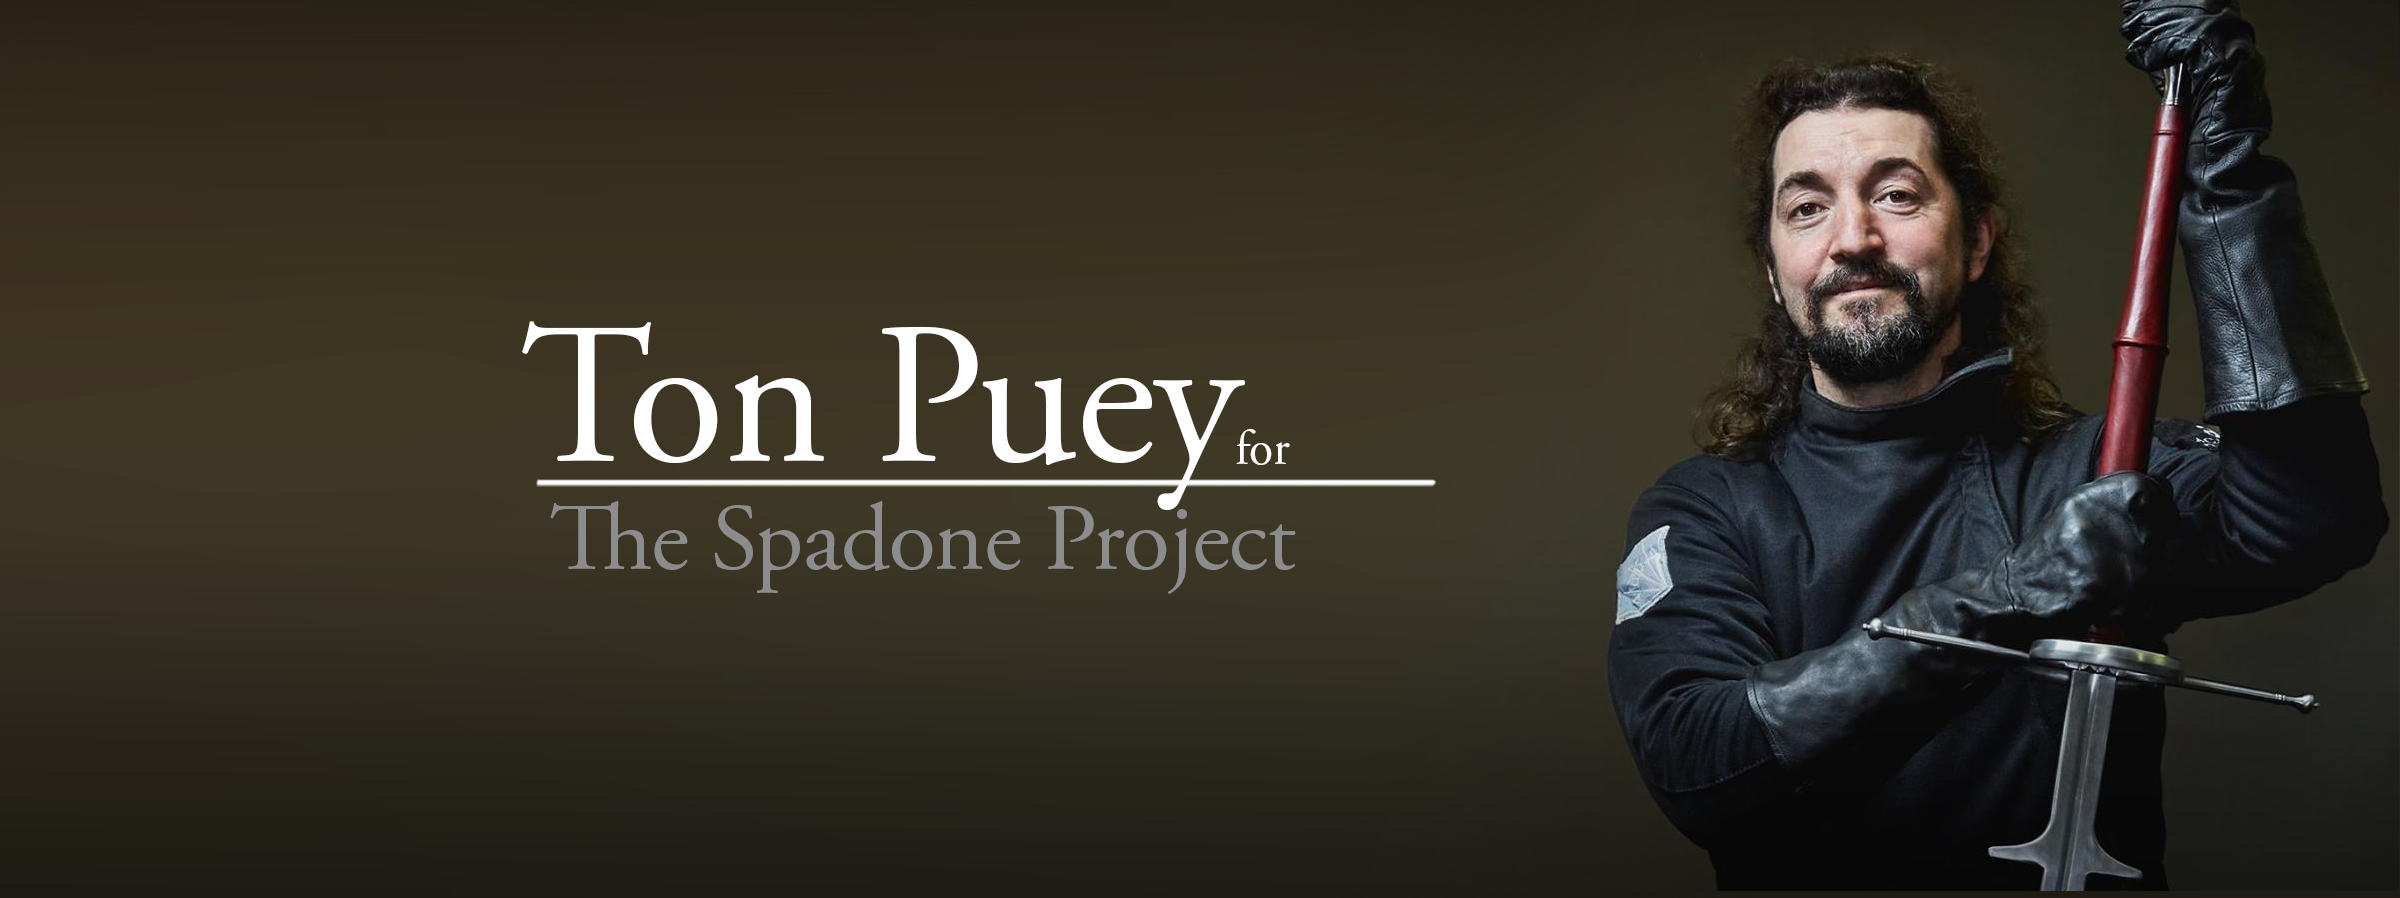 Iberian montante: an interview with Ton Puey